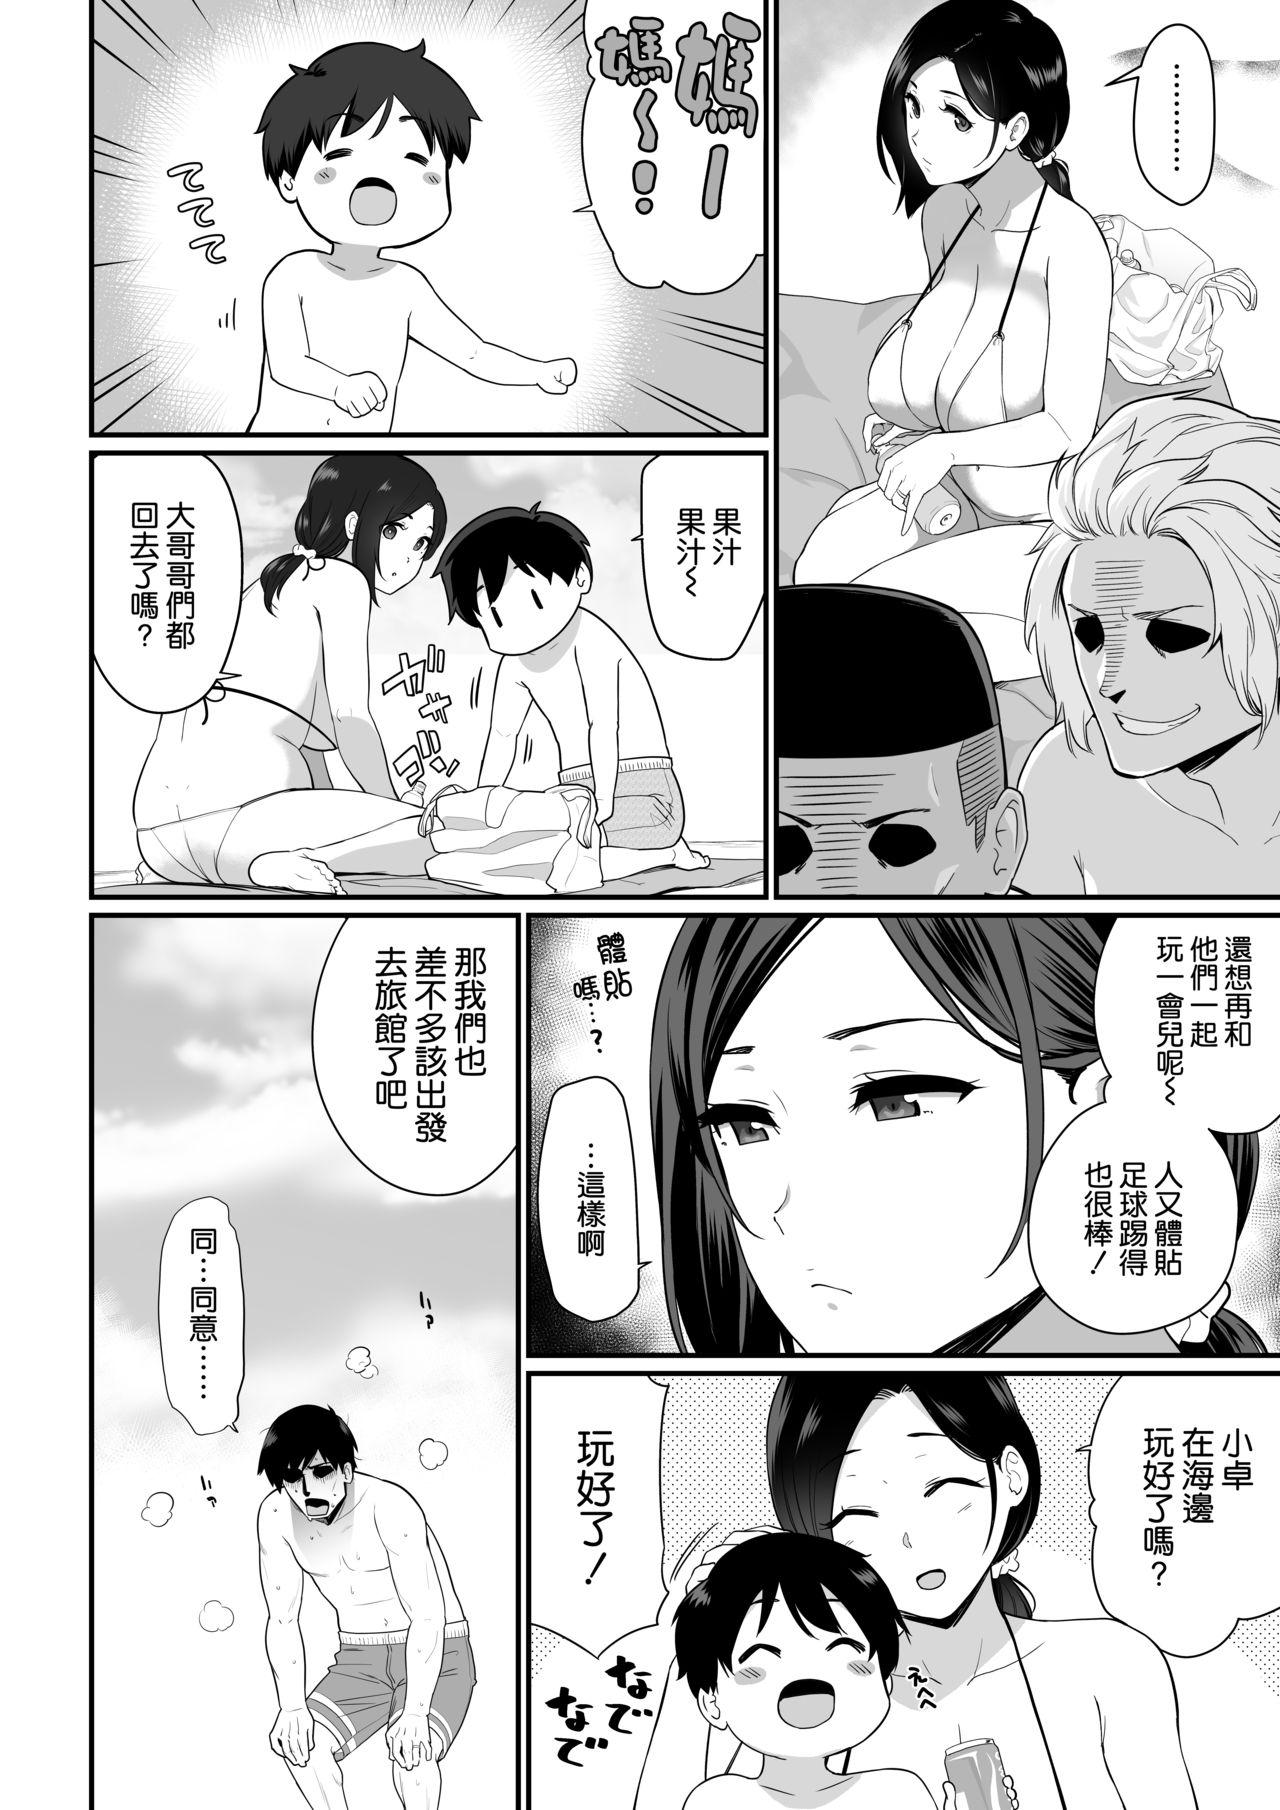 Best Blowjobs お母さんいただきます。2 連載 P1-26 - Original Monster - Page 4